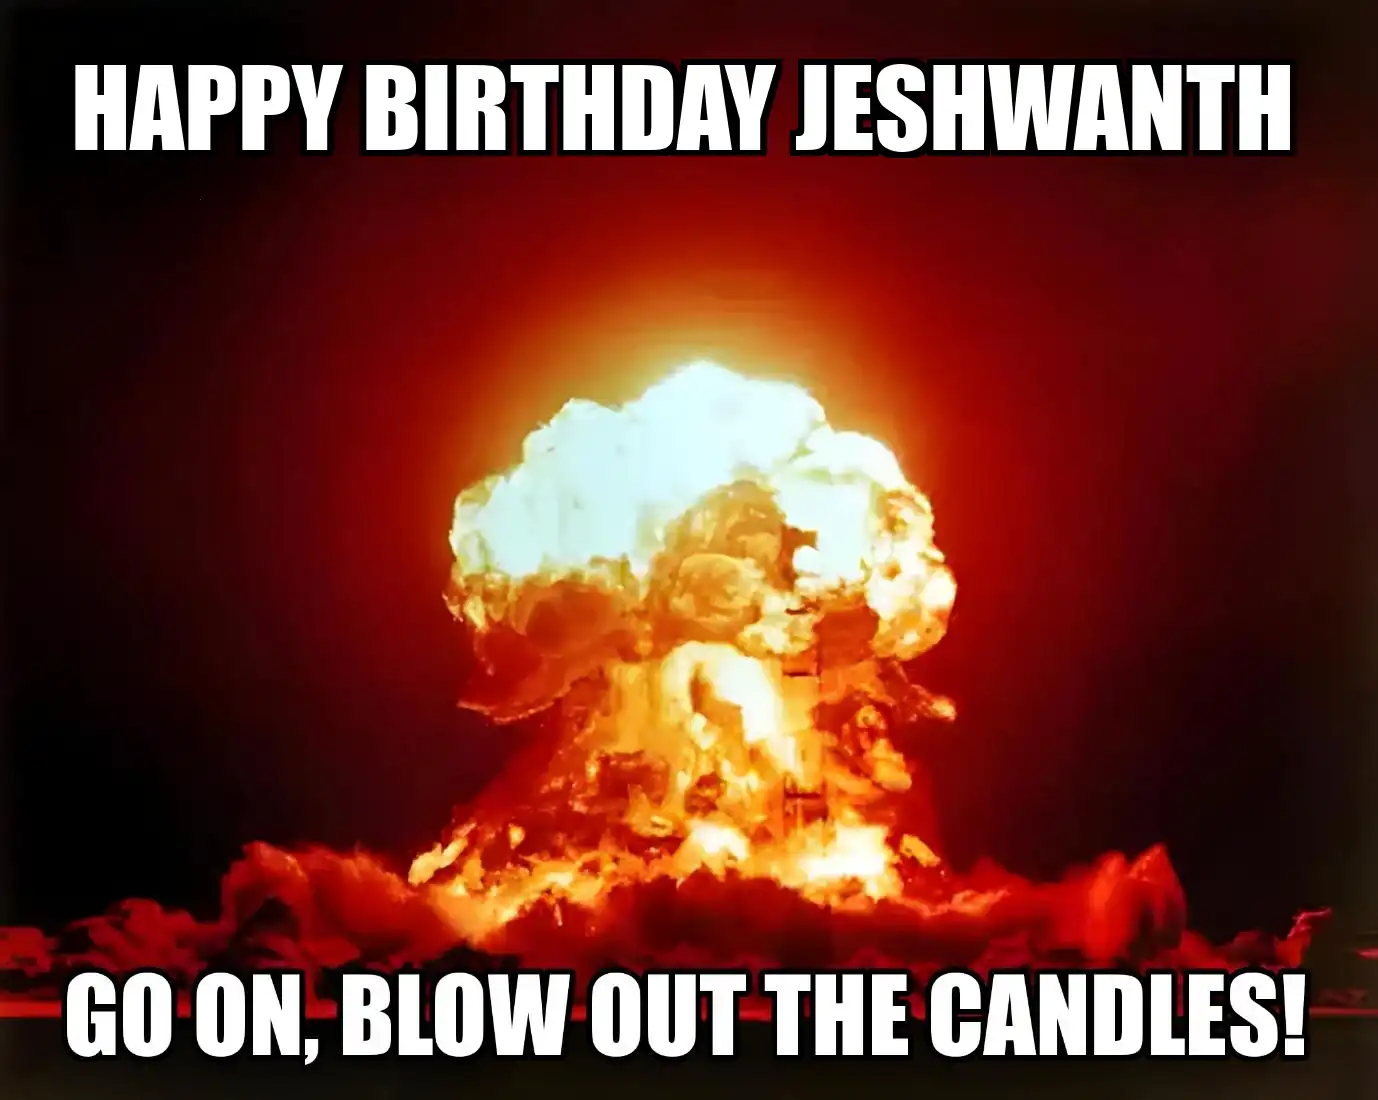 Happy Birthday Jeshwanth Go On Blow Out The Candles Meme